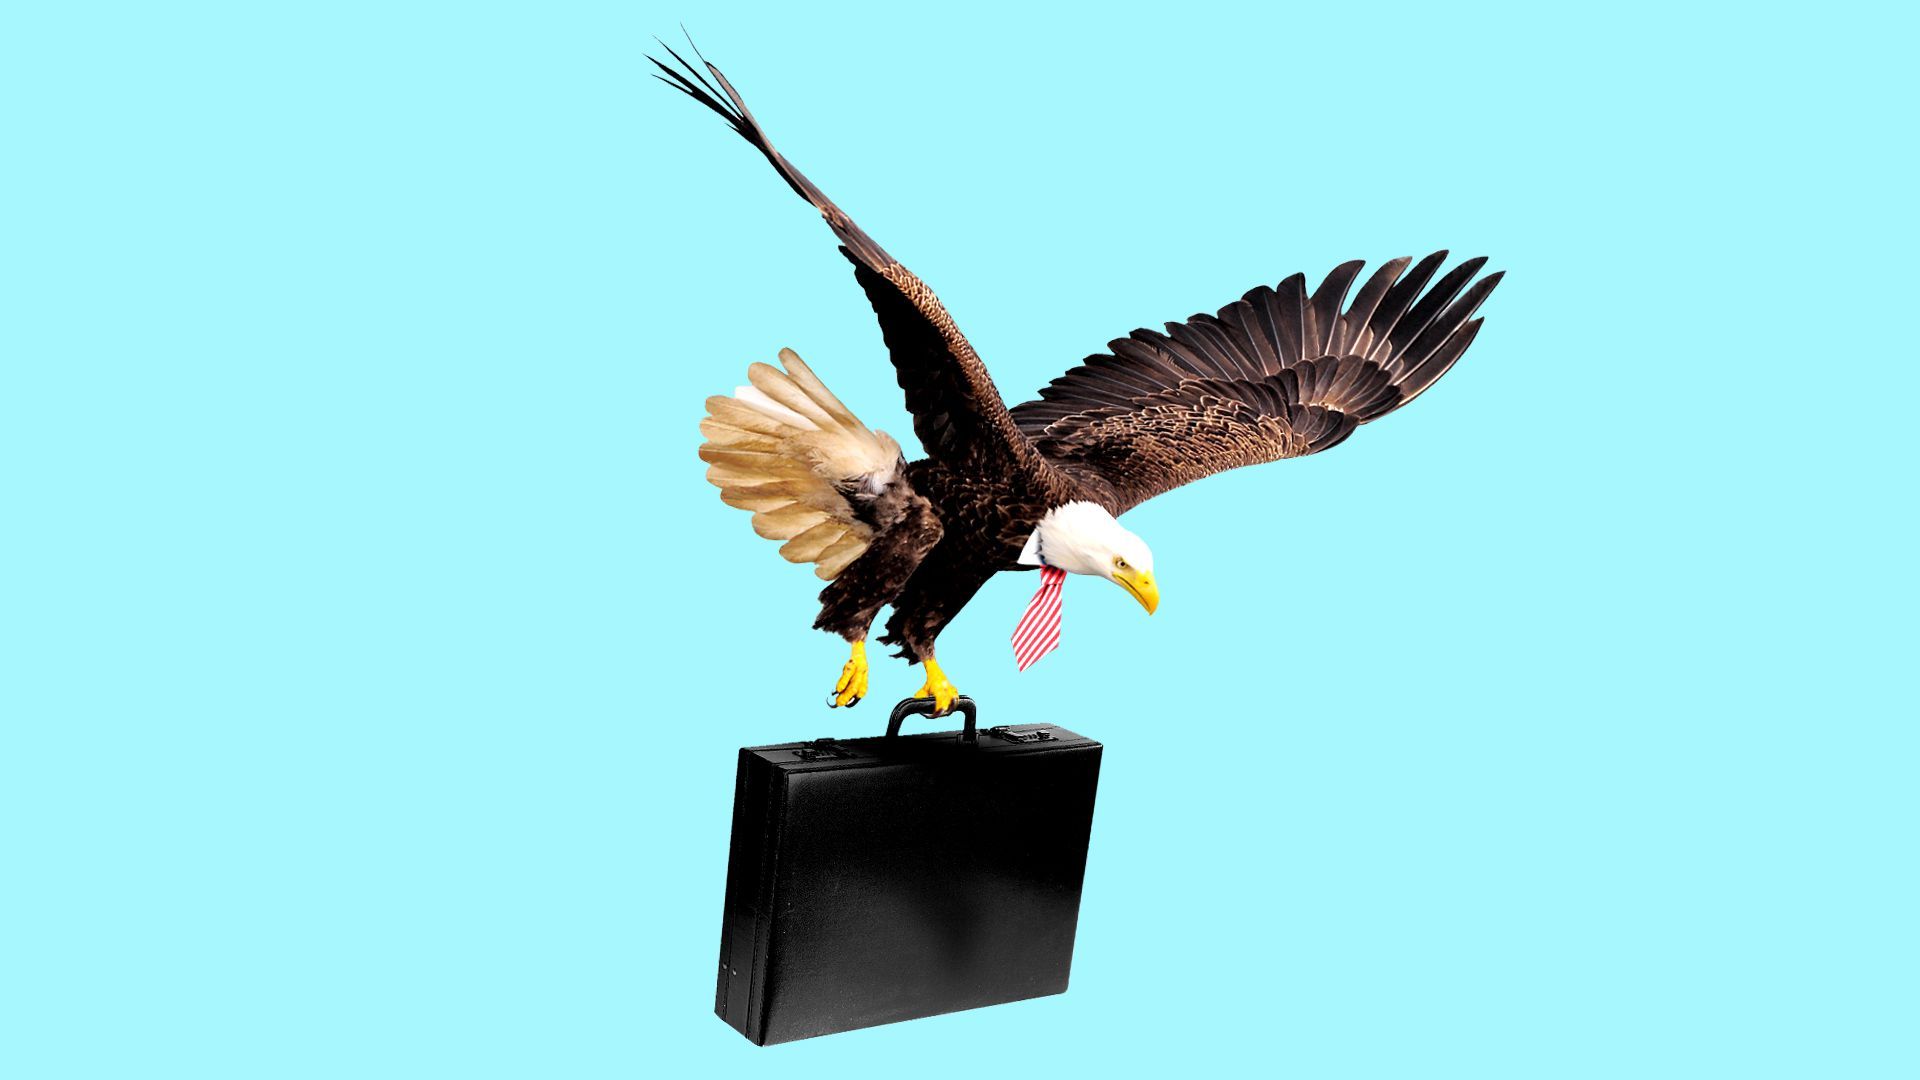 Illustration of an eagle wearing a tie, flying through the air holding a briefcase.   